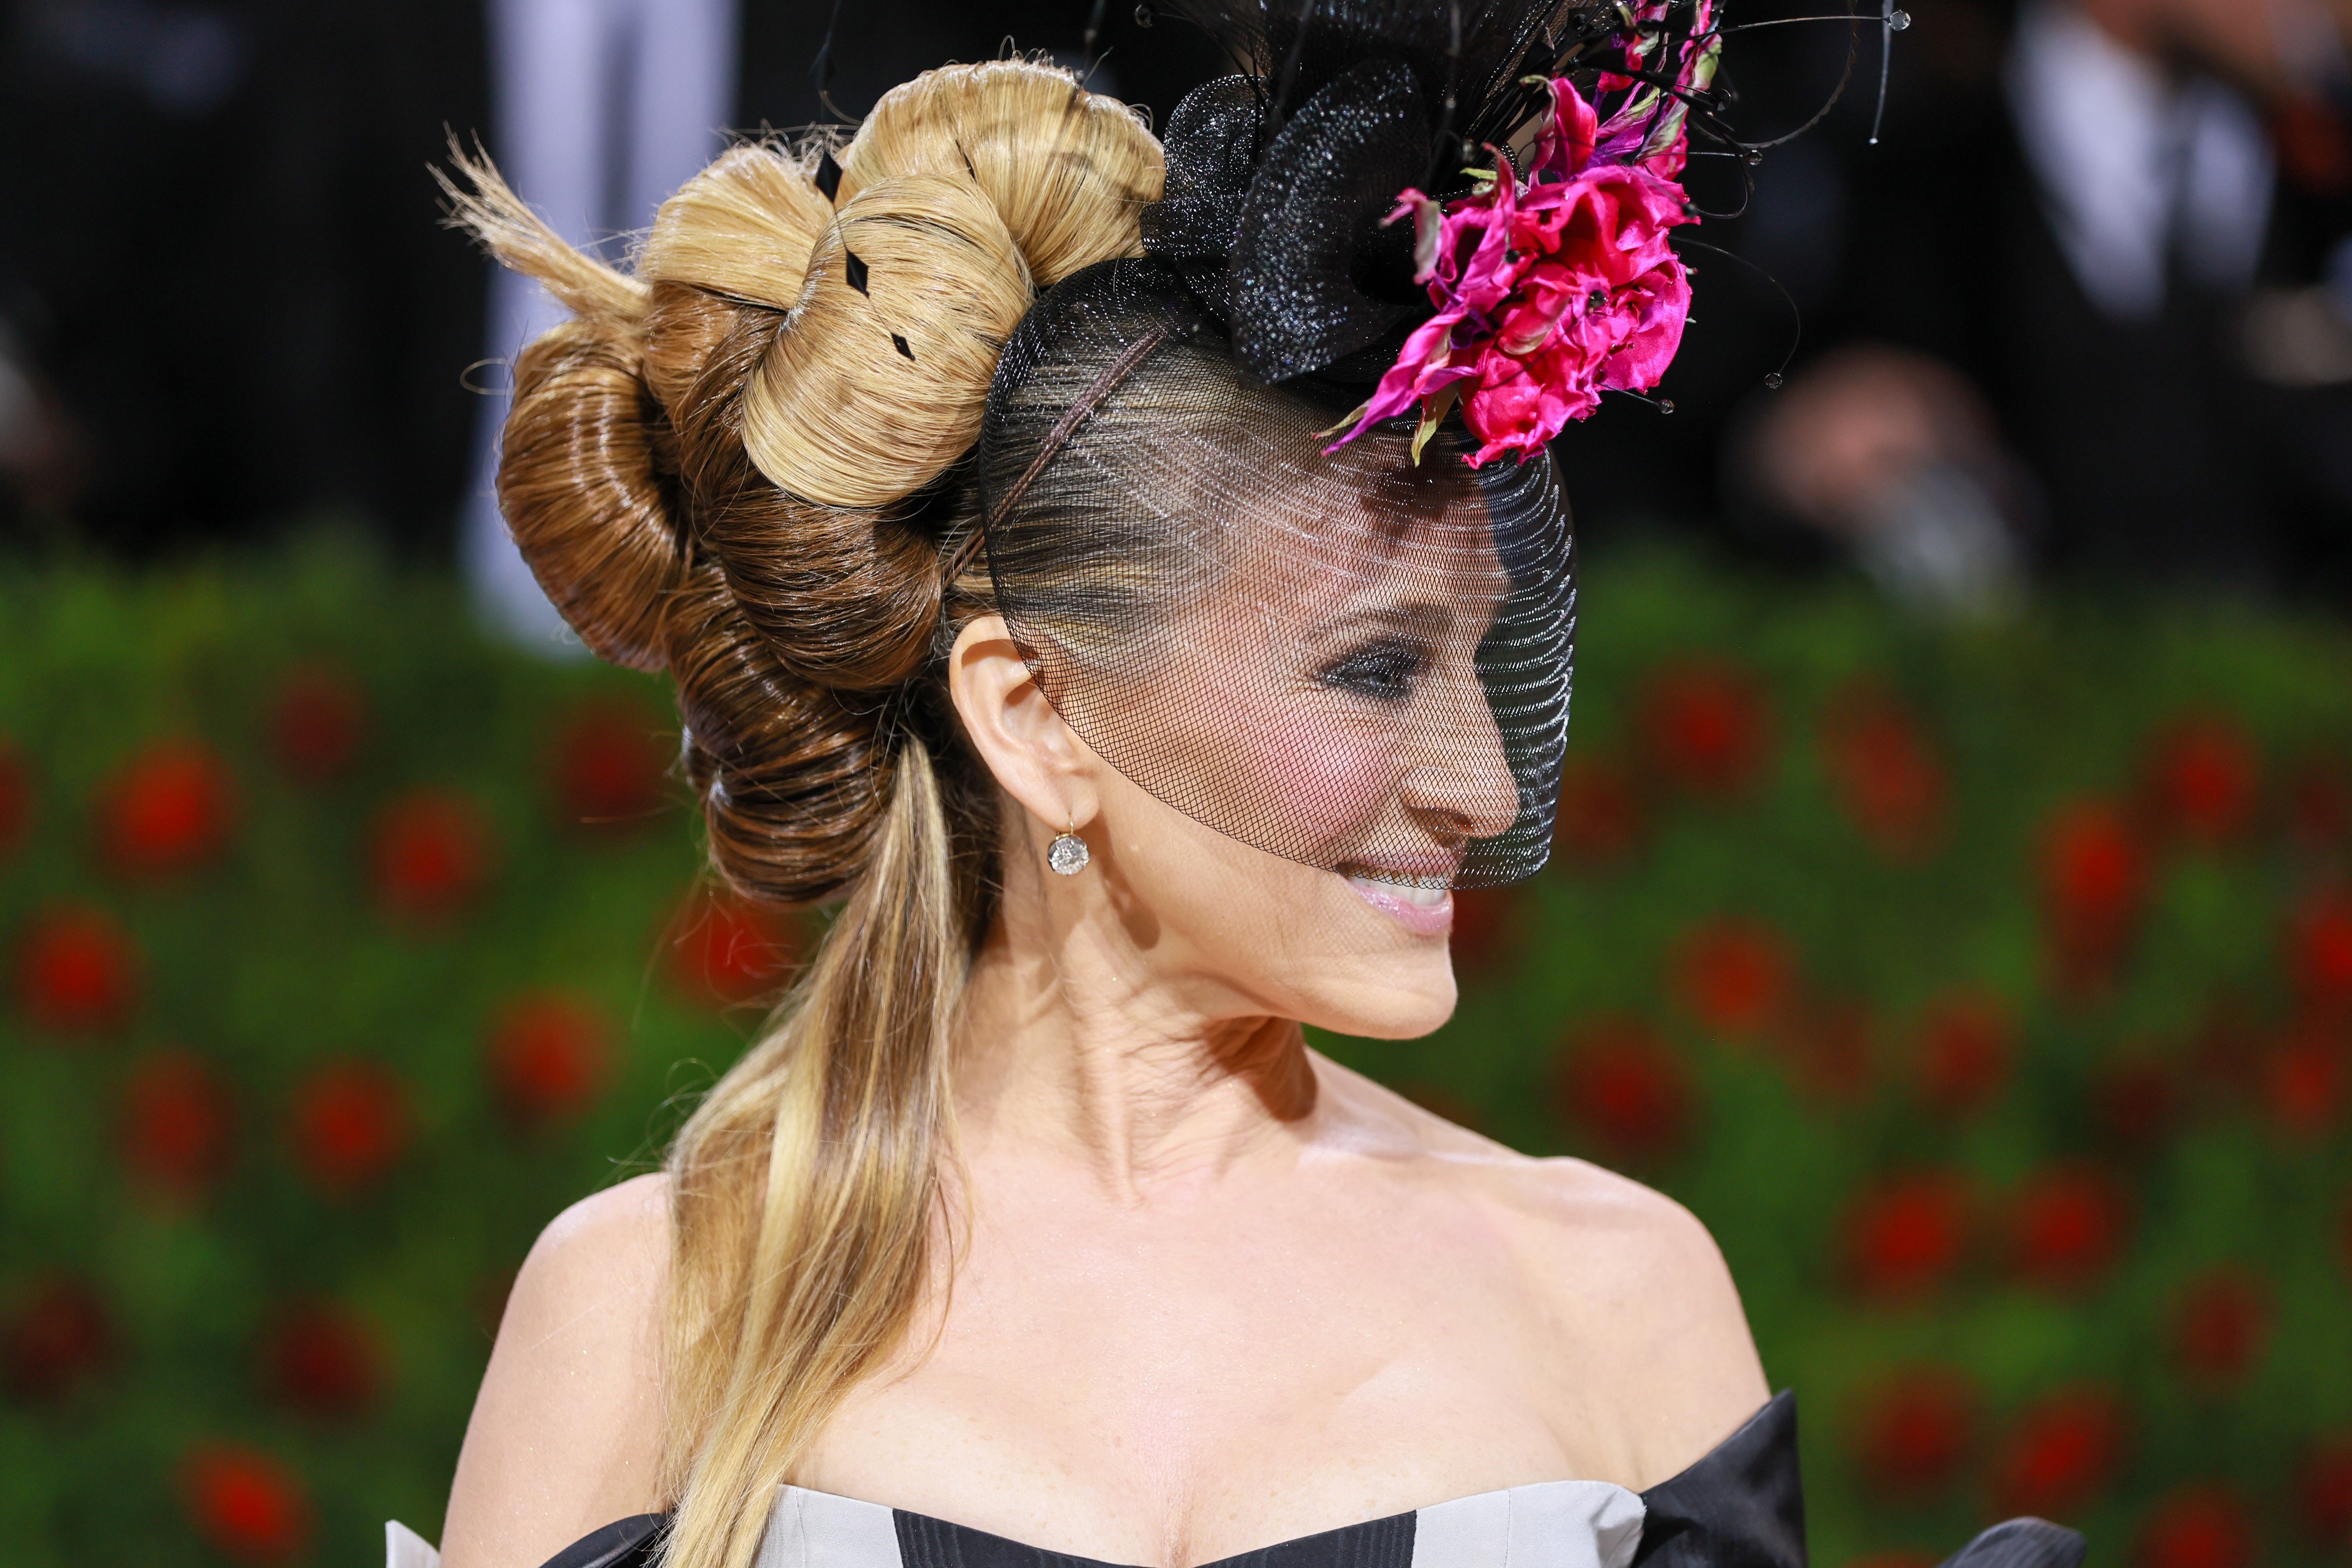 NEW YORK, NEW YORK - MAY 02: Sarah Jessica Parker attends The 2022 Met Gala Celebrating "In America: An Anthology of Fashion" at The Metropolitan Museum of Art on May 02, 2022 in New York City. (Photo by Theo Wargo/WireImage) (Foto: WireImage)